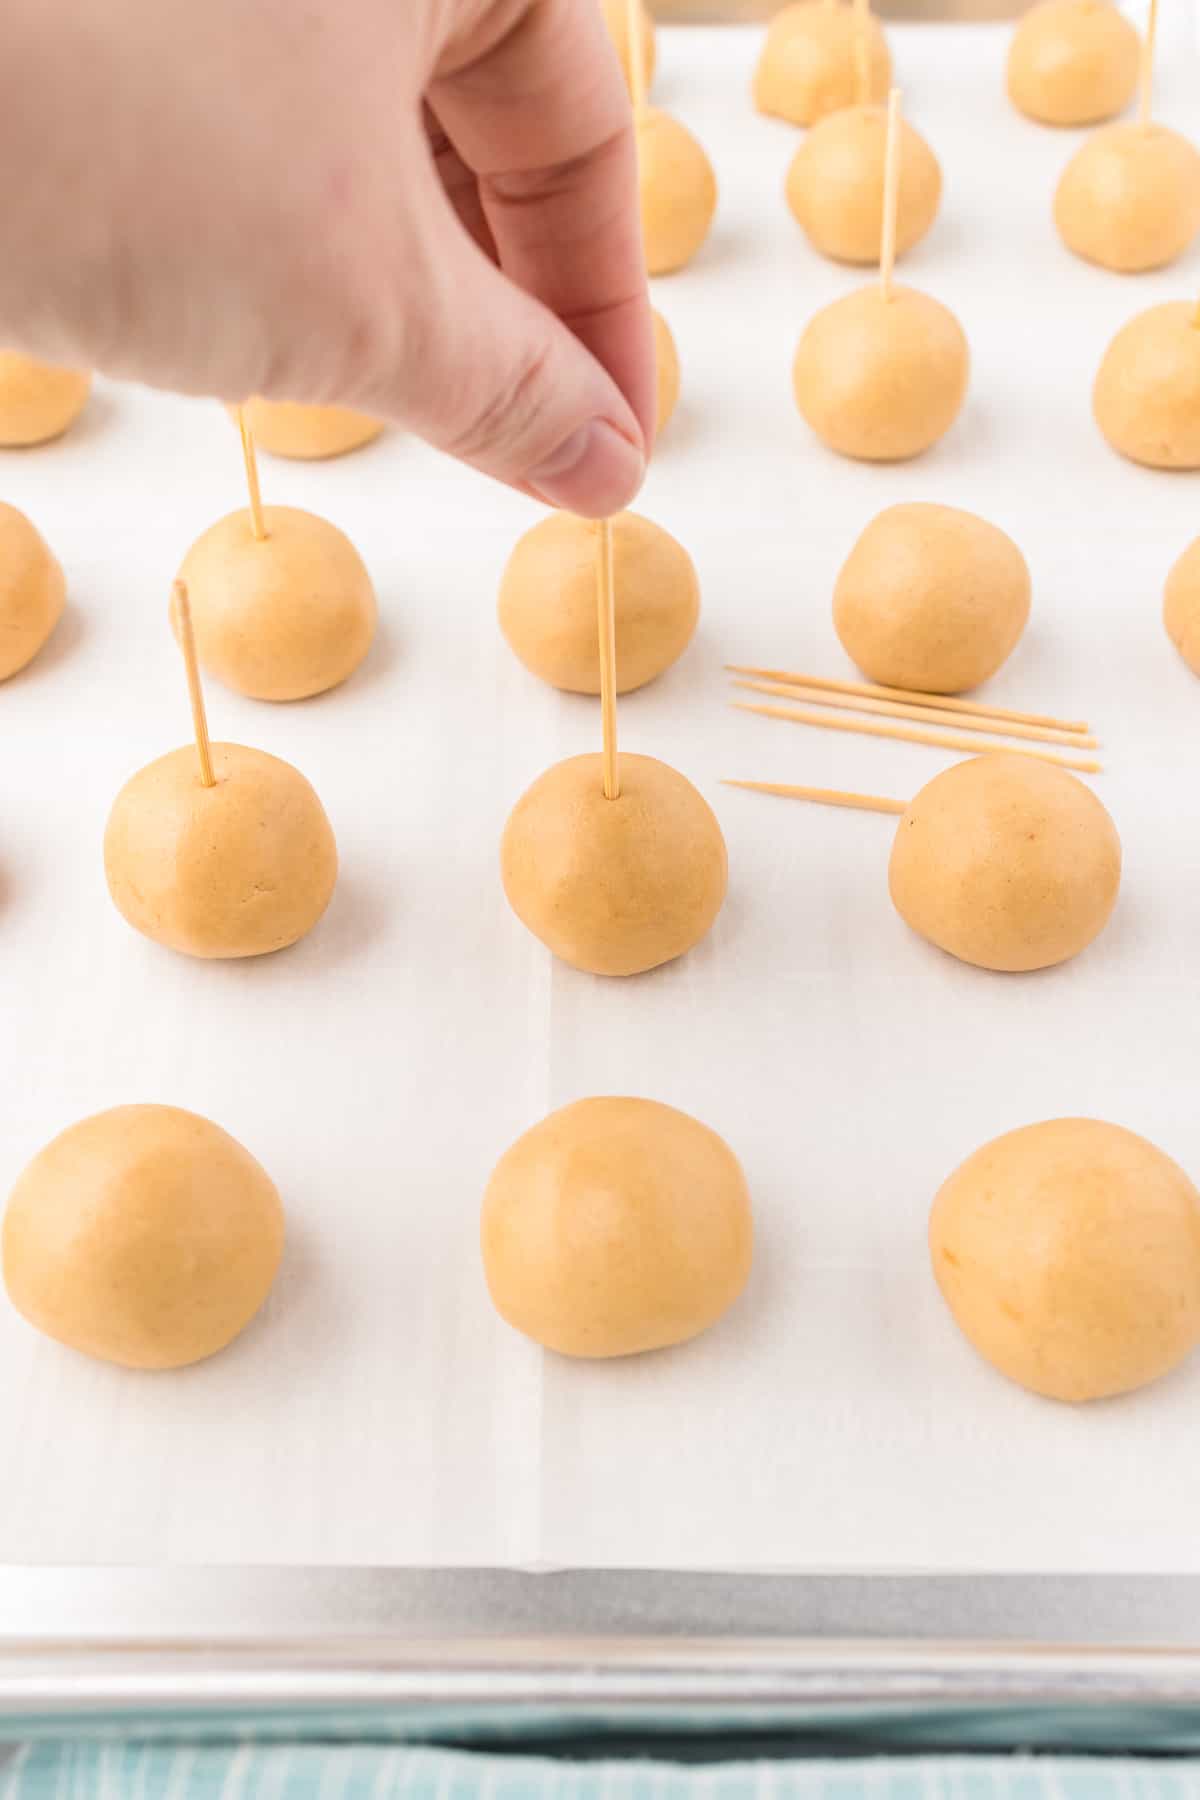 Toothpicks being placed in each peanut butter dough ball on a sheet pan from the side.